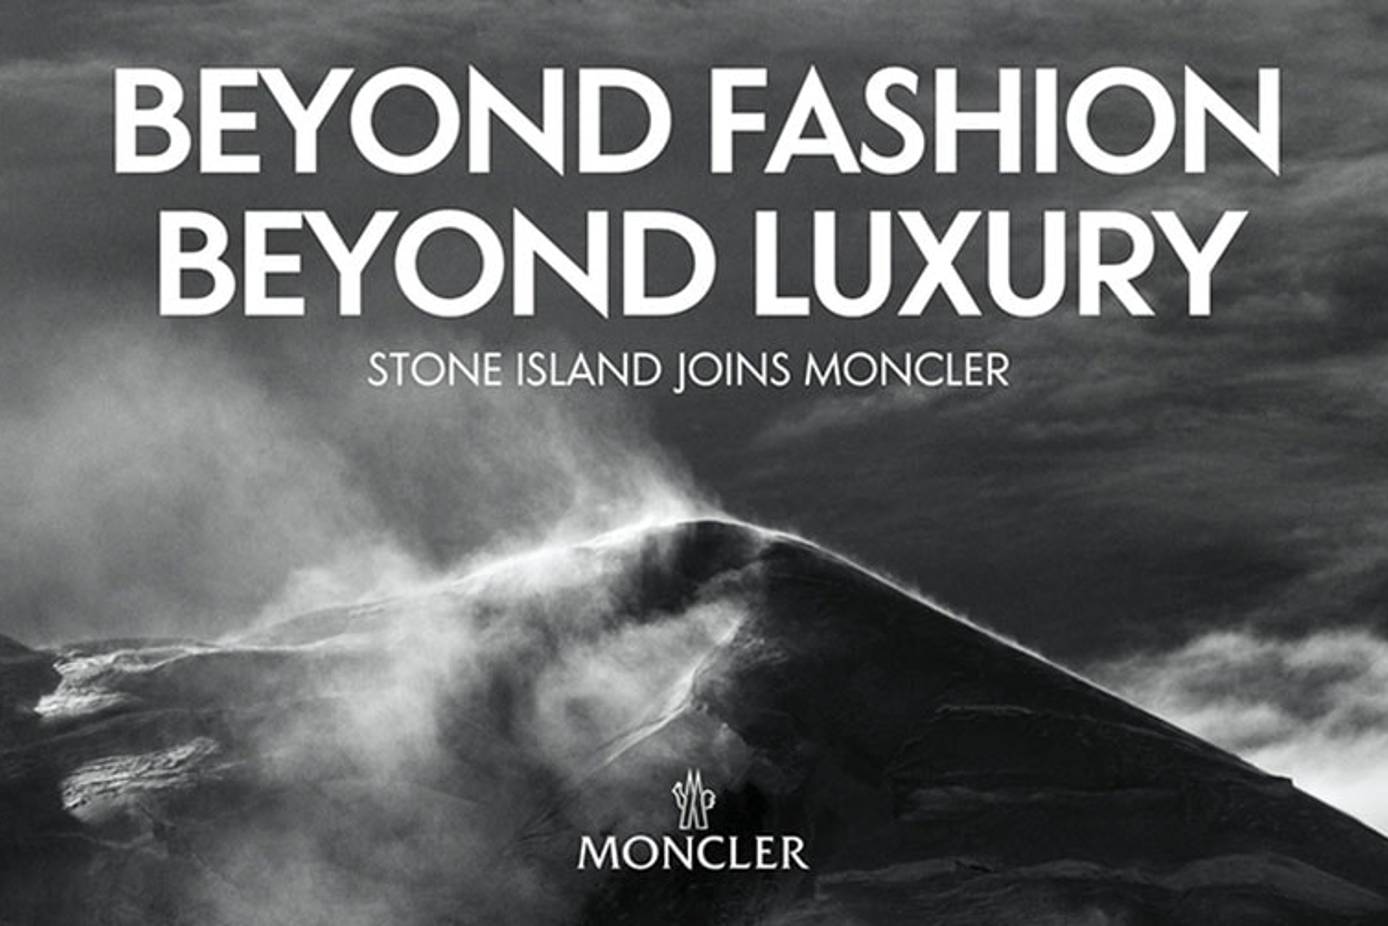 Moncler's CEO On What's Next for Stone Island